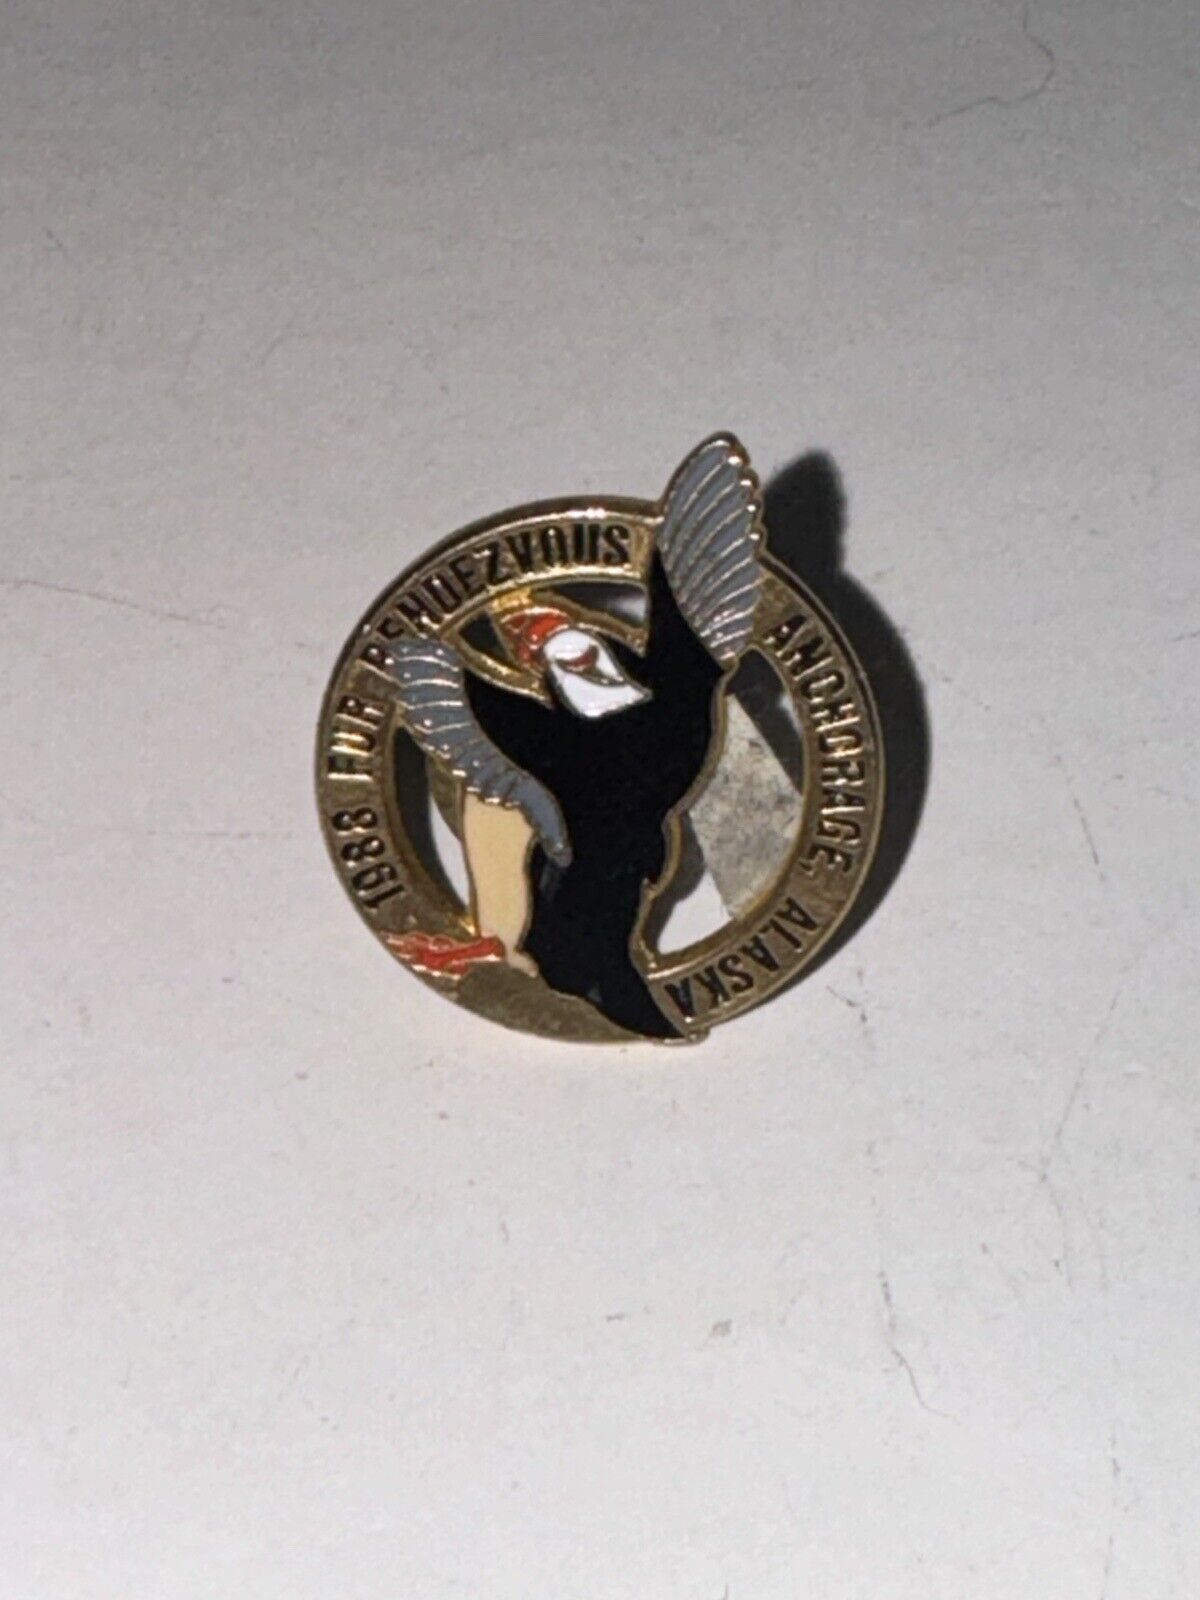 1988 Anchorage Alaska Fur Rendezvous SMALL Metal Collector Pin PUFFIN